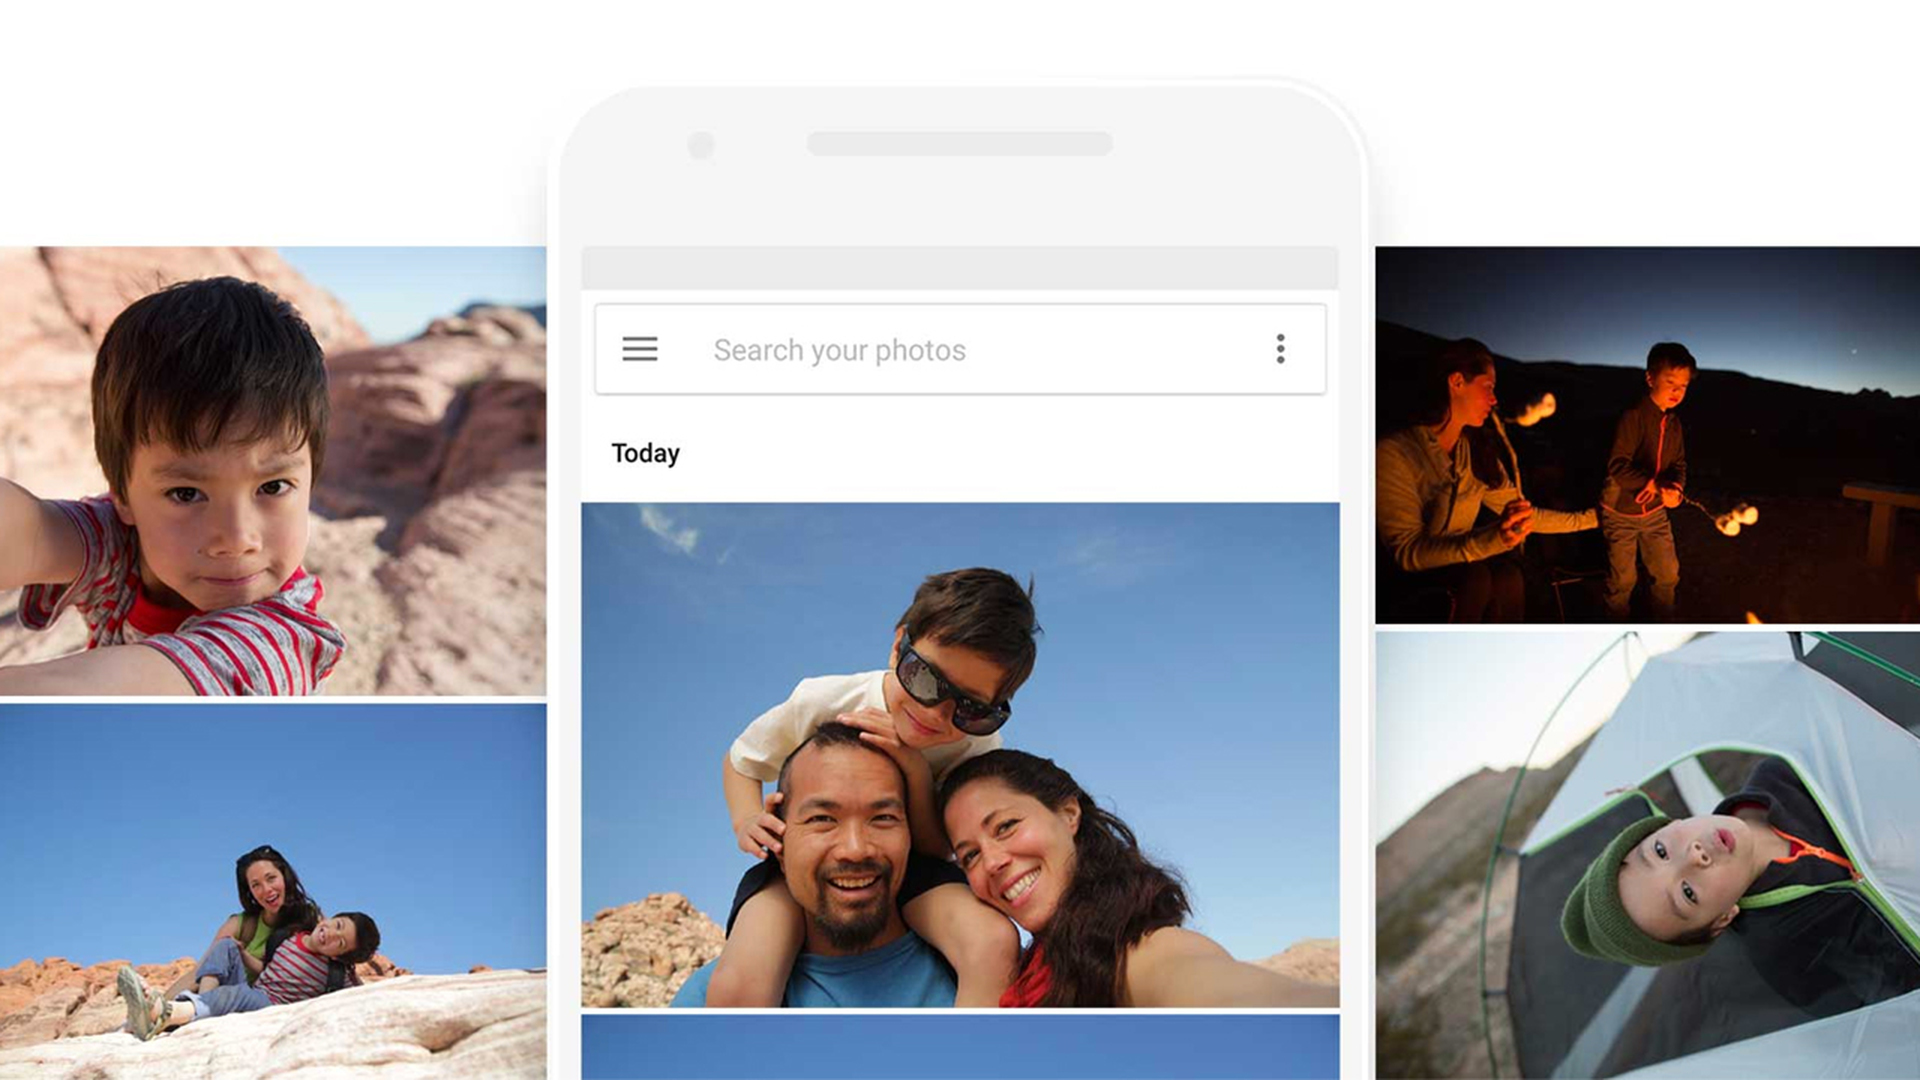 "the Photo" is able to look for now Google in the text in images.